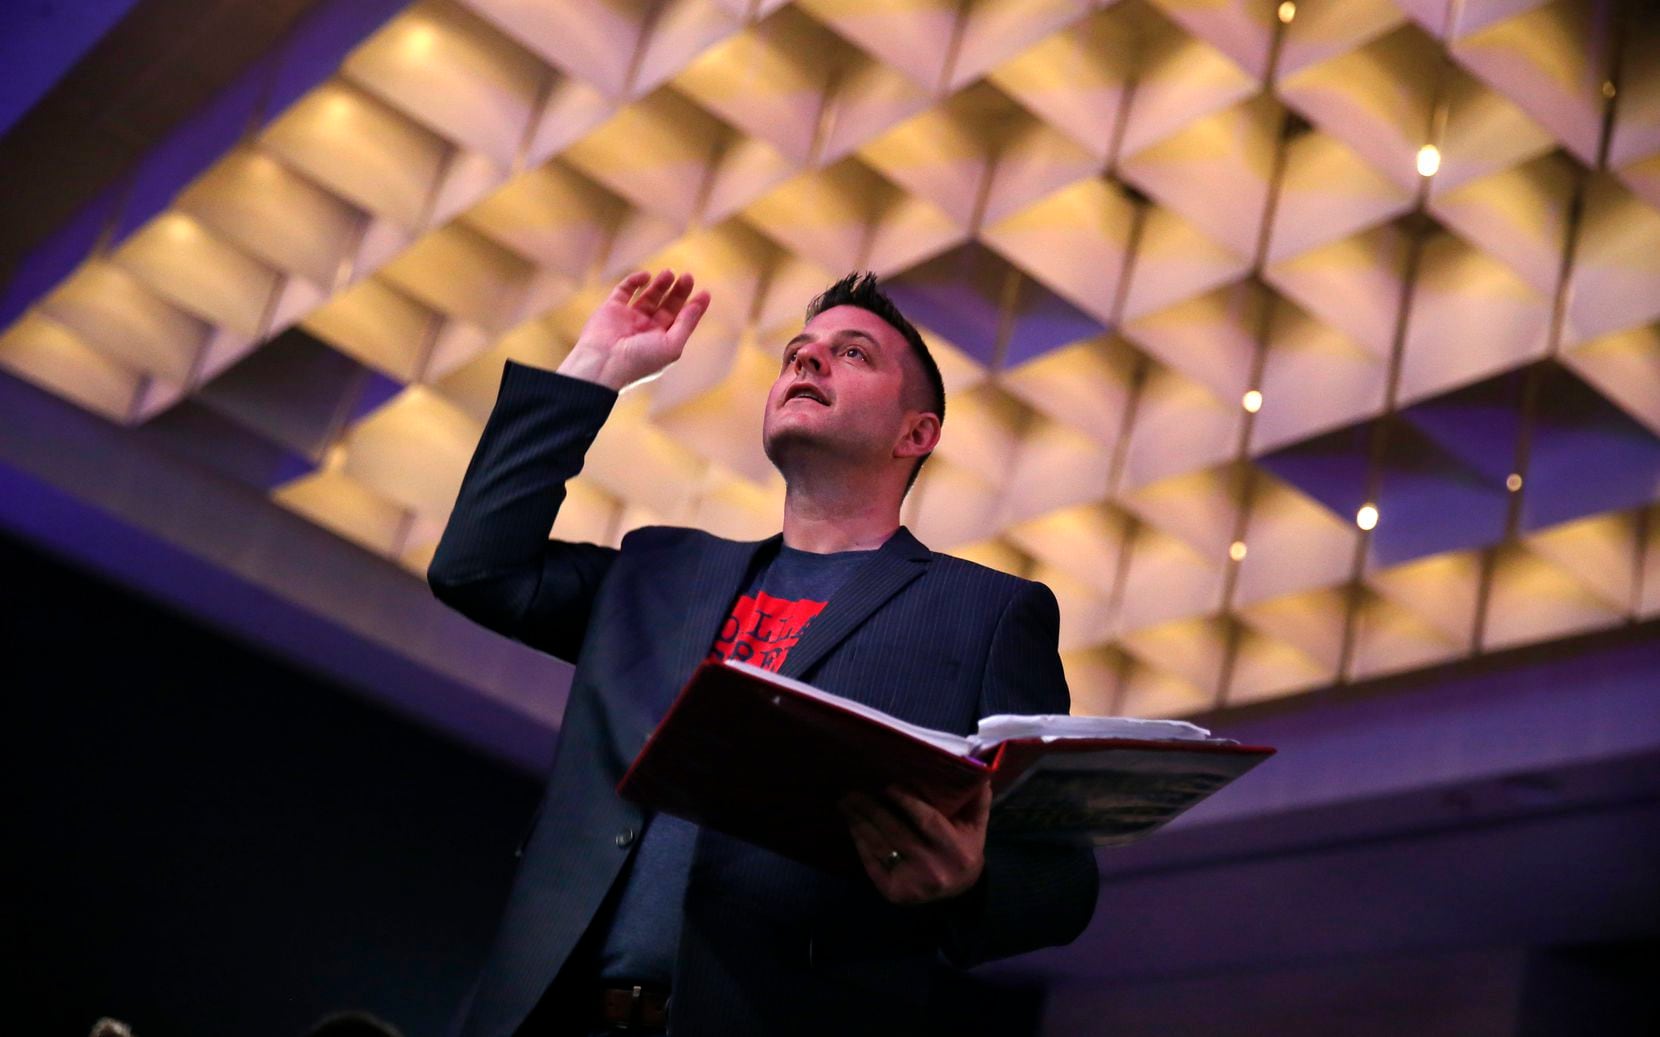 Director Jonathan Palant leads the Dallas Street Choir during the opening session of The Dallas Festival of Ideas at the Kay Bailey Hutchison Convention Center, Saturday, April 29, 2017.